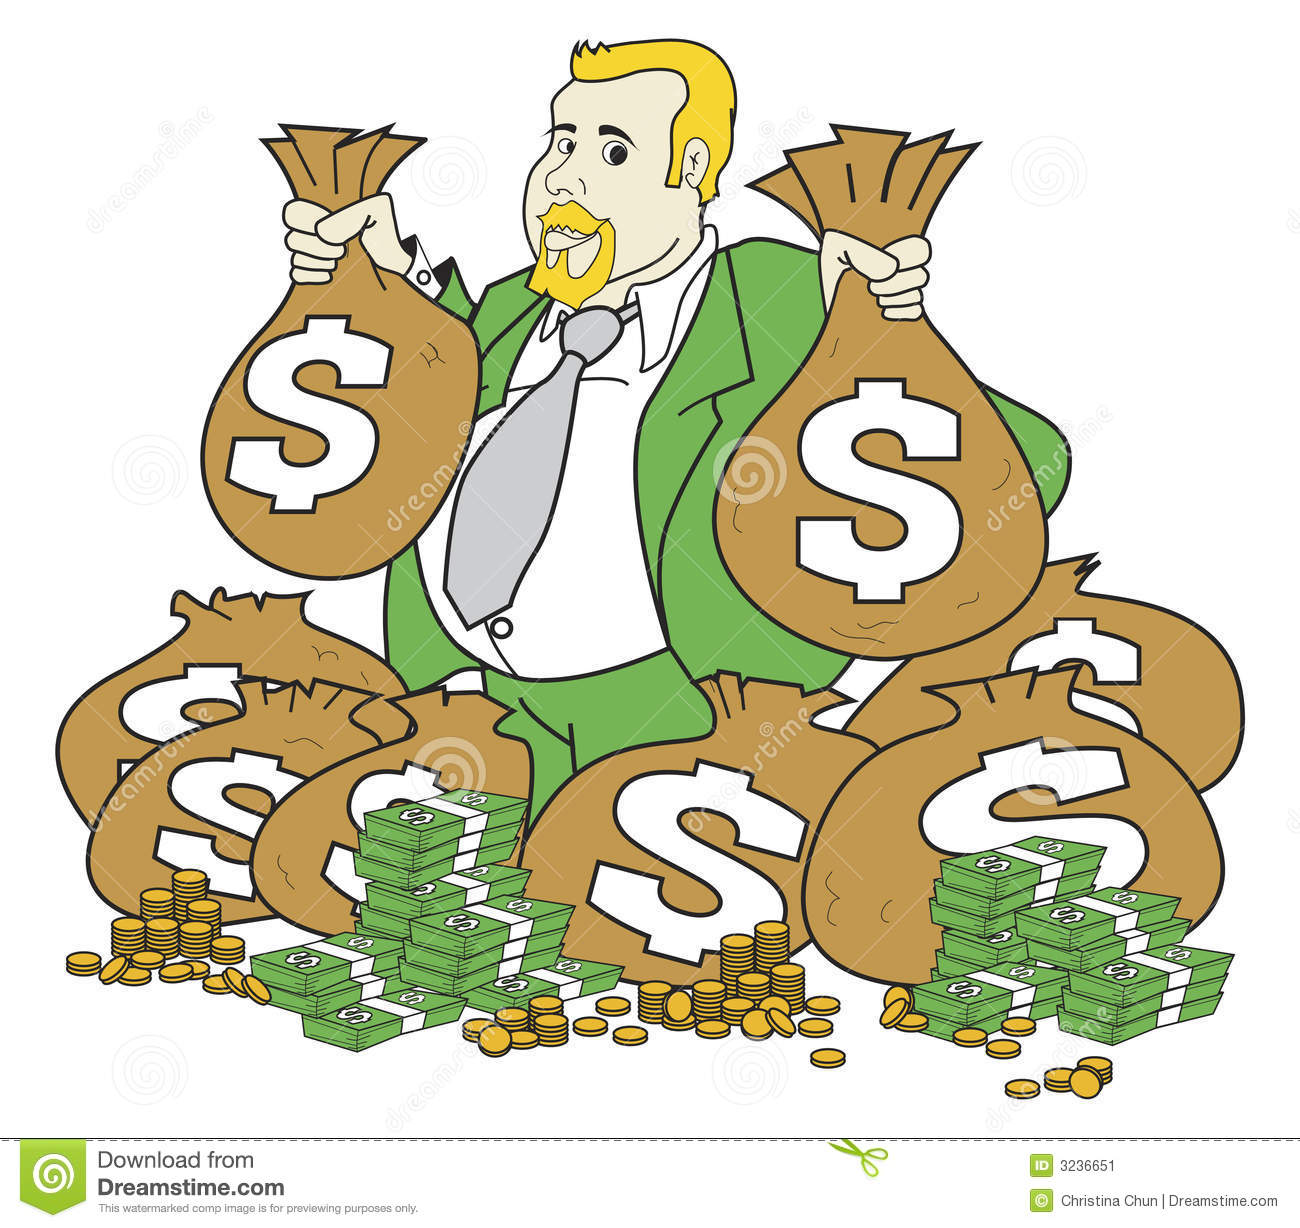 Illustration Of A Very Rich Man With Money Bags And Loads Of Cash